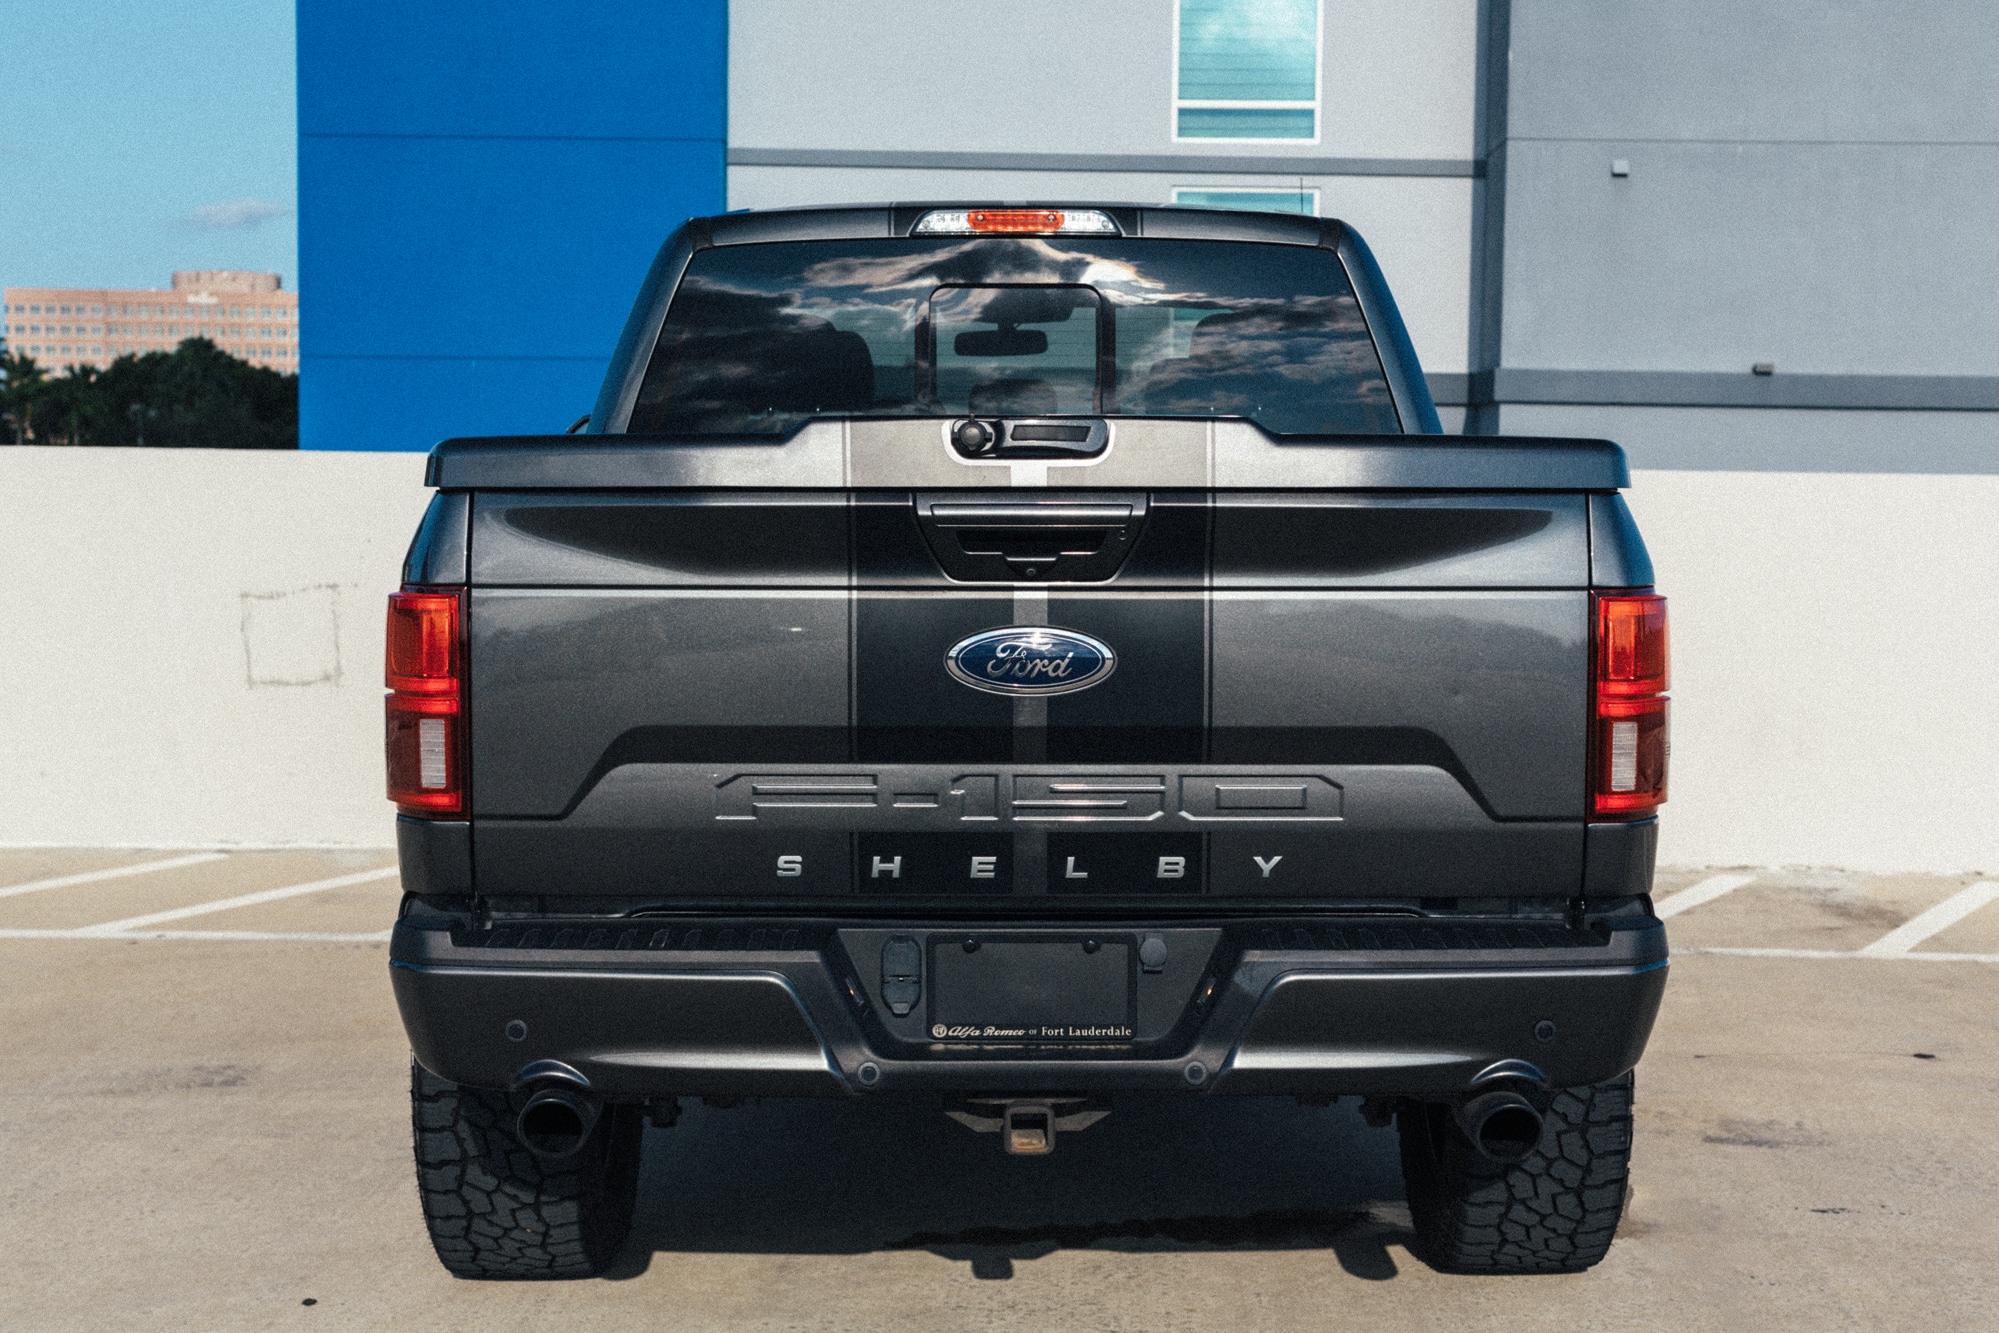 2019 Shelby F-150 Lariat (13th Gen) OPTIONAL Whipple Supercharged | 775 HP | #73 of 500 | Magnetic Grey | Shelby FOX-BDS Suspension | Falken Wildpeak A/T | Fully Loaded